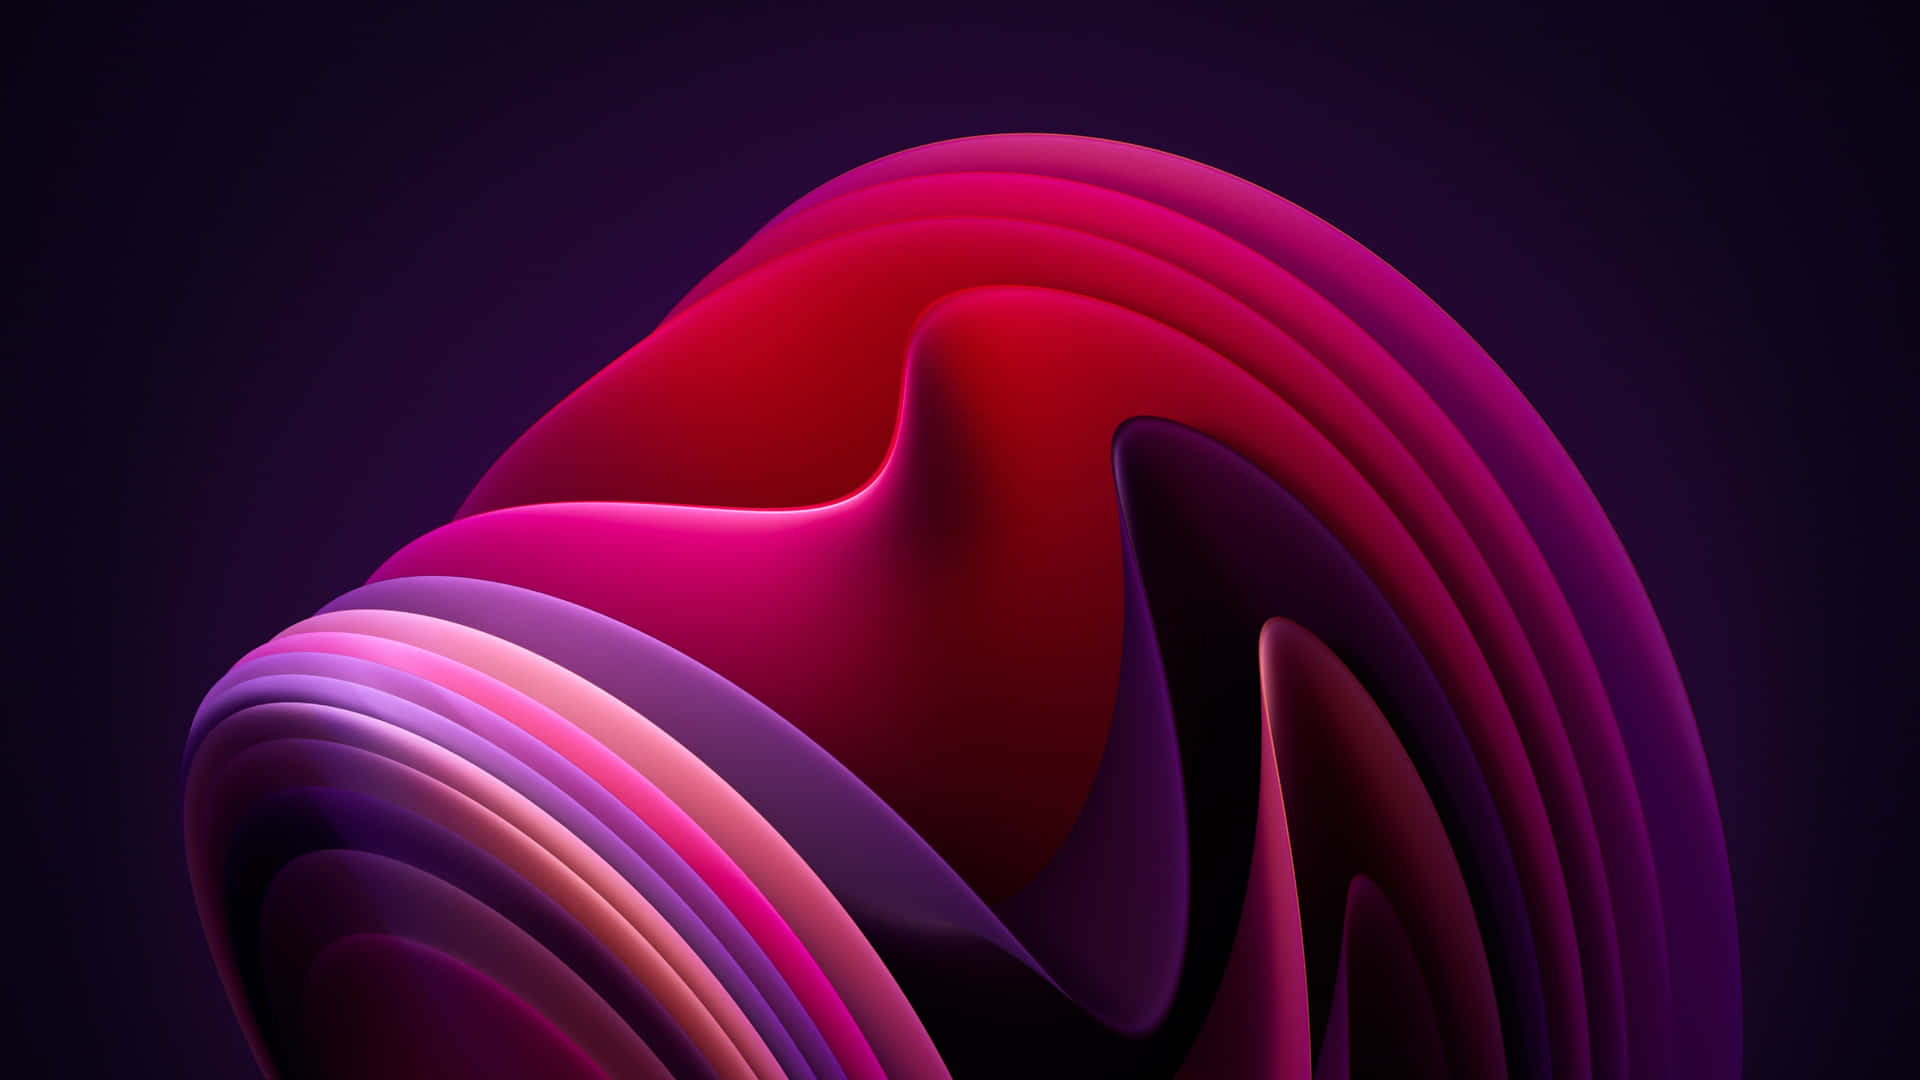 A cool and colorful customizable Windows 10 desktop Wallpaper